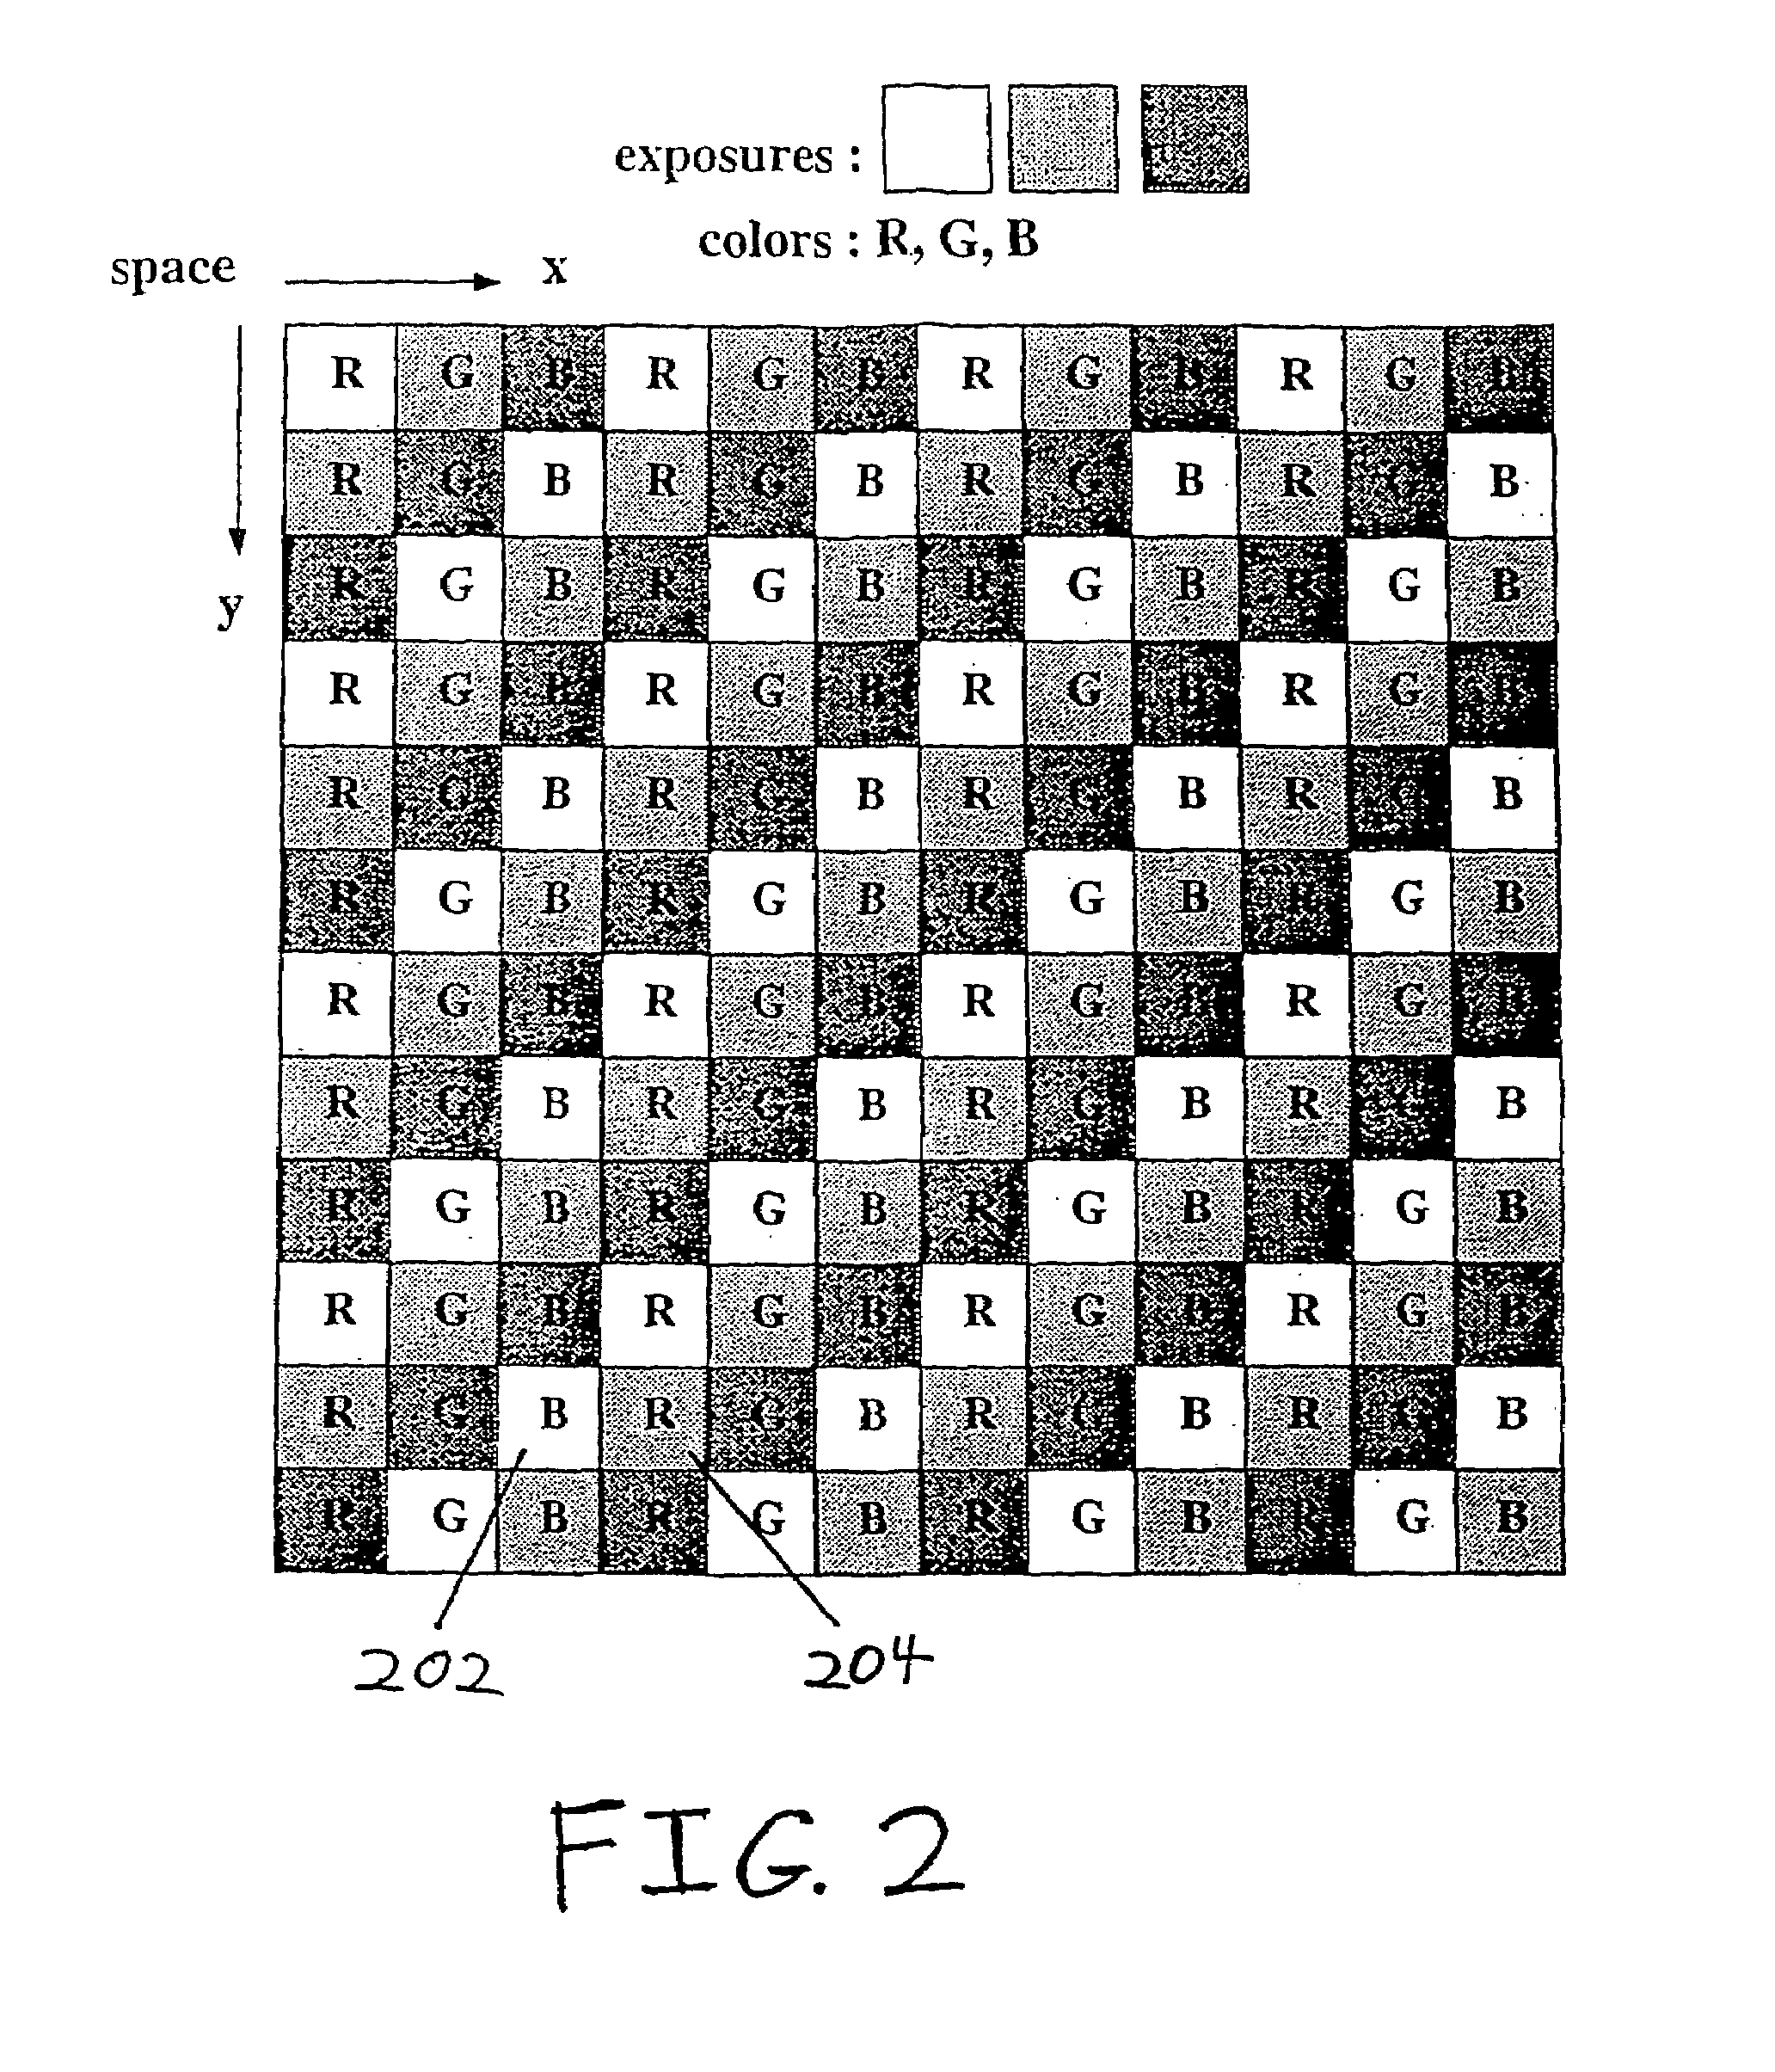 Method and apparatus for enhancing data resolution